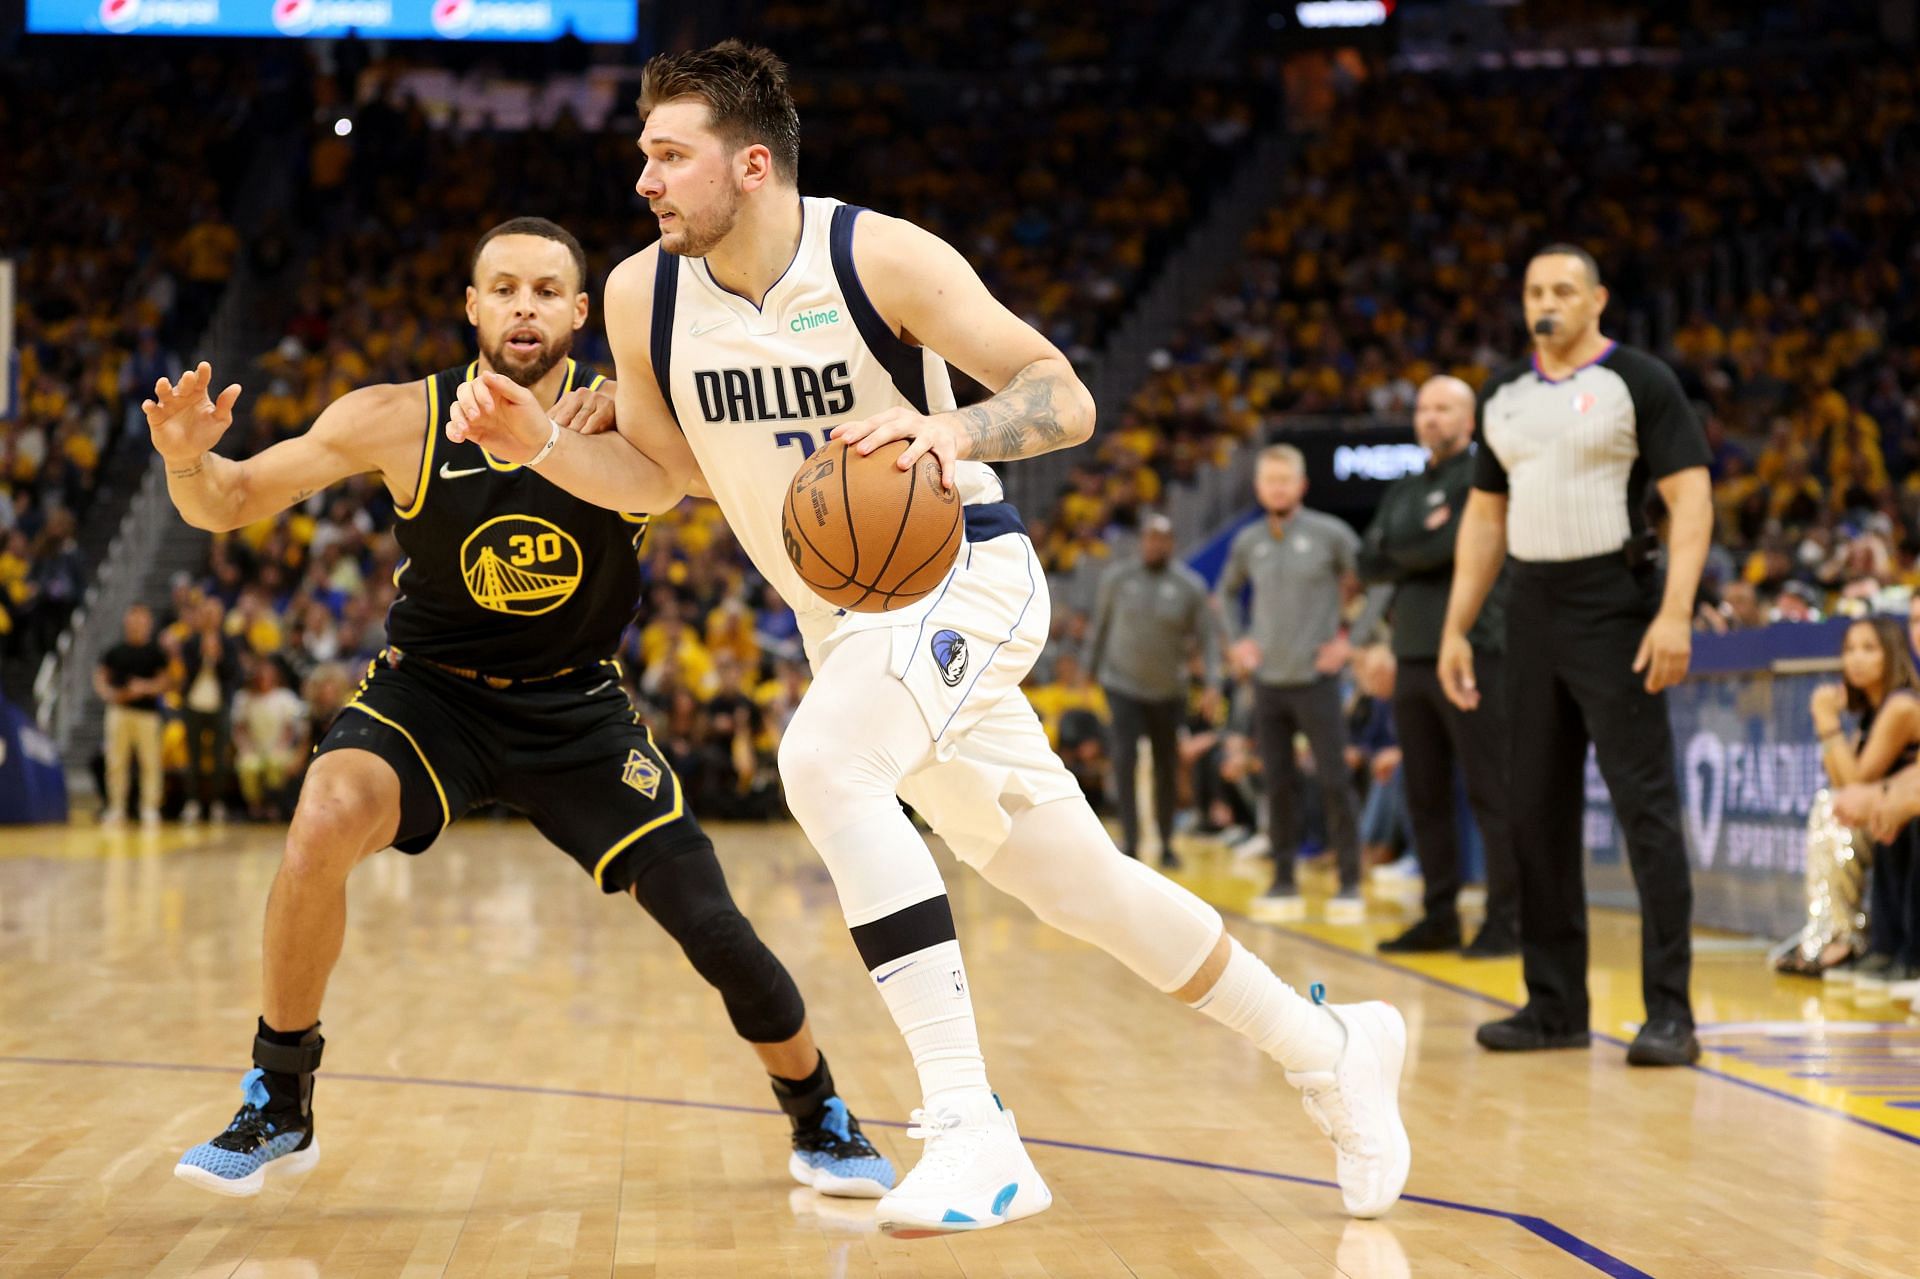 Luka Doncic of the Dallas Mavericks drives against Stephen Curry of the Golden State Warriors.